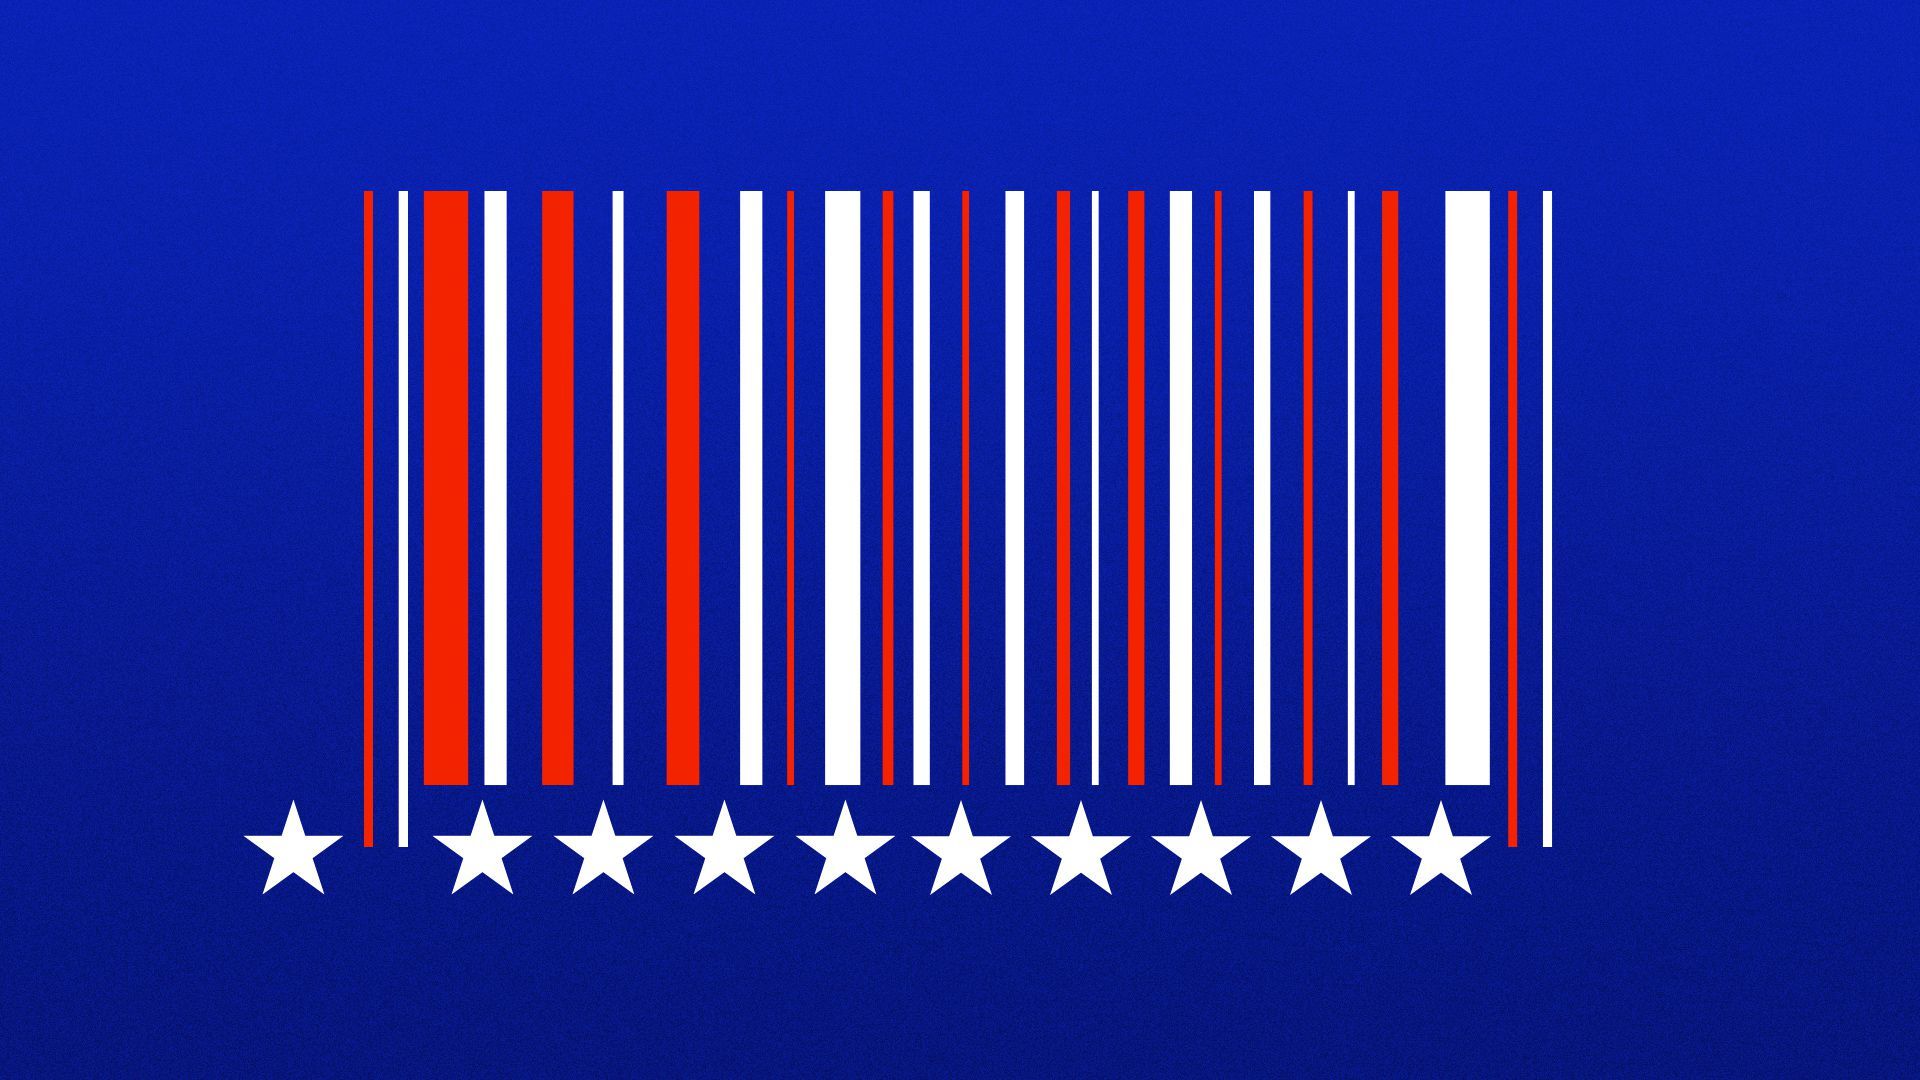 Illustration of a barcode stylized as the American flag. 